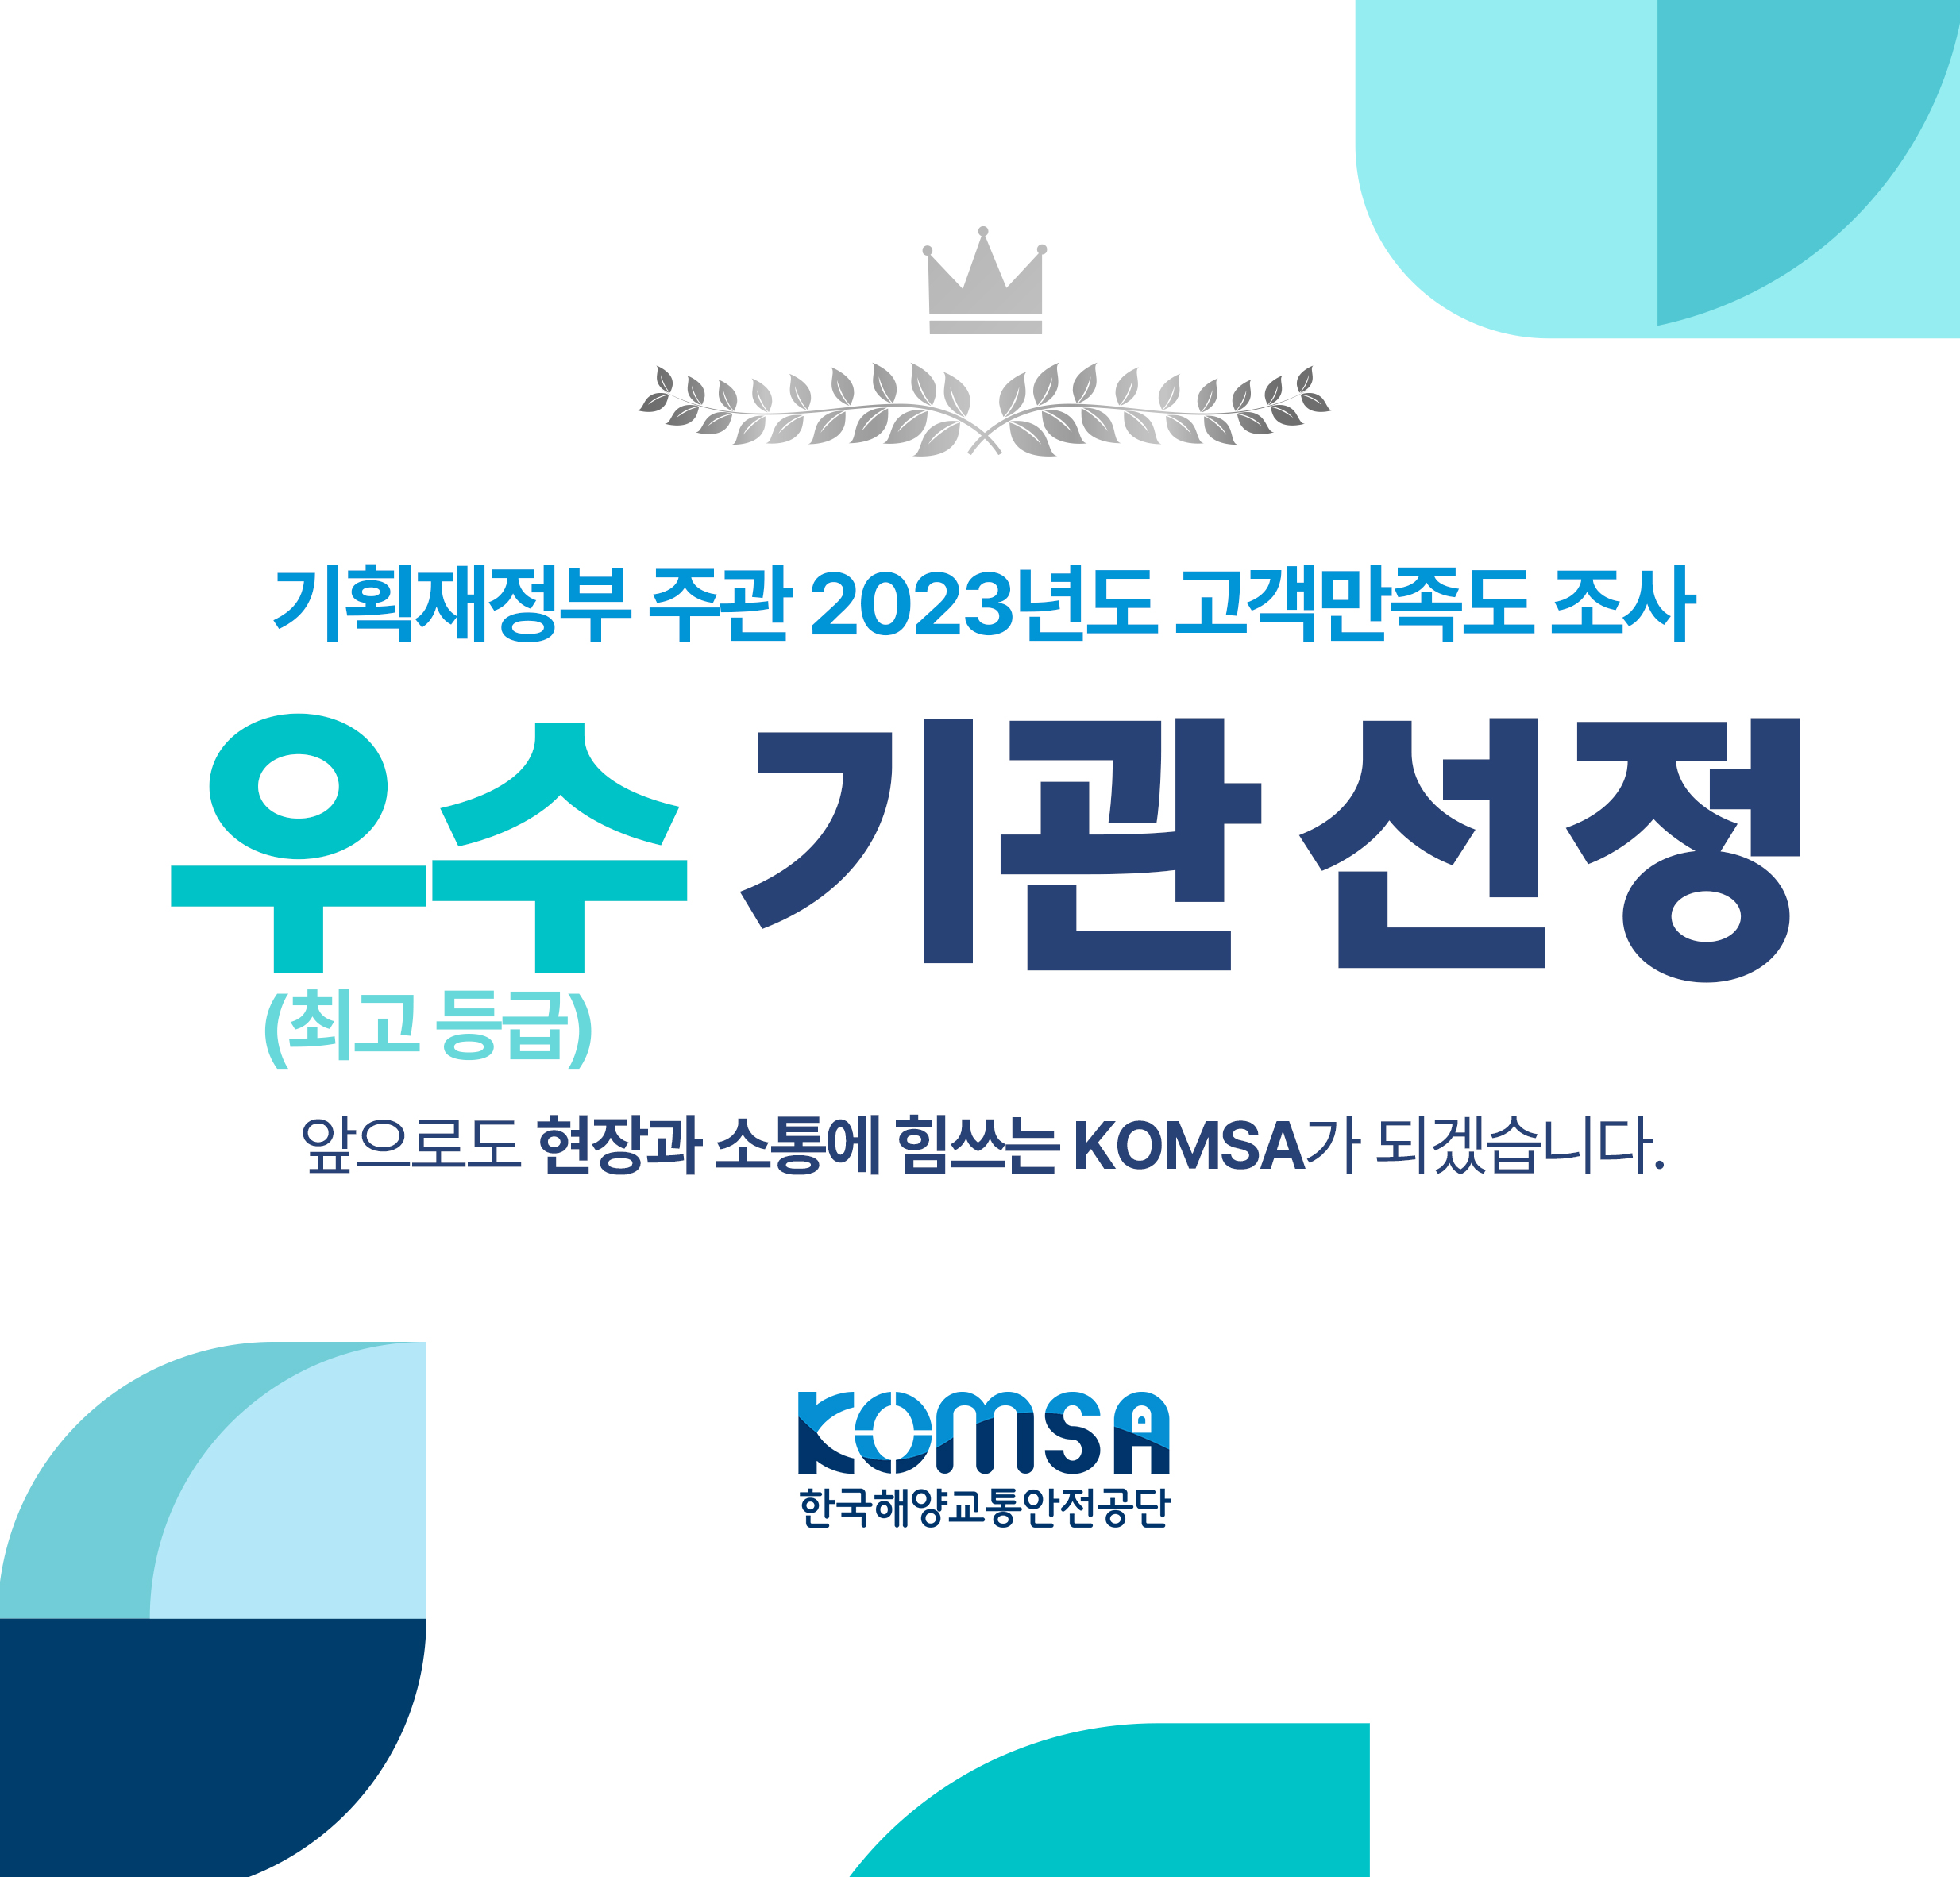 https://www.komsa.or.kr/kor/;jsessionid=2EE555045BC0EFBE9AD4AED773E0E810